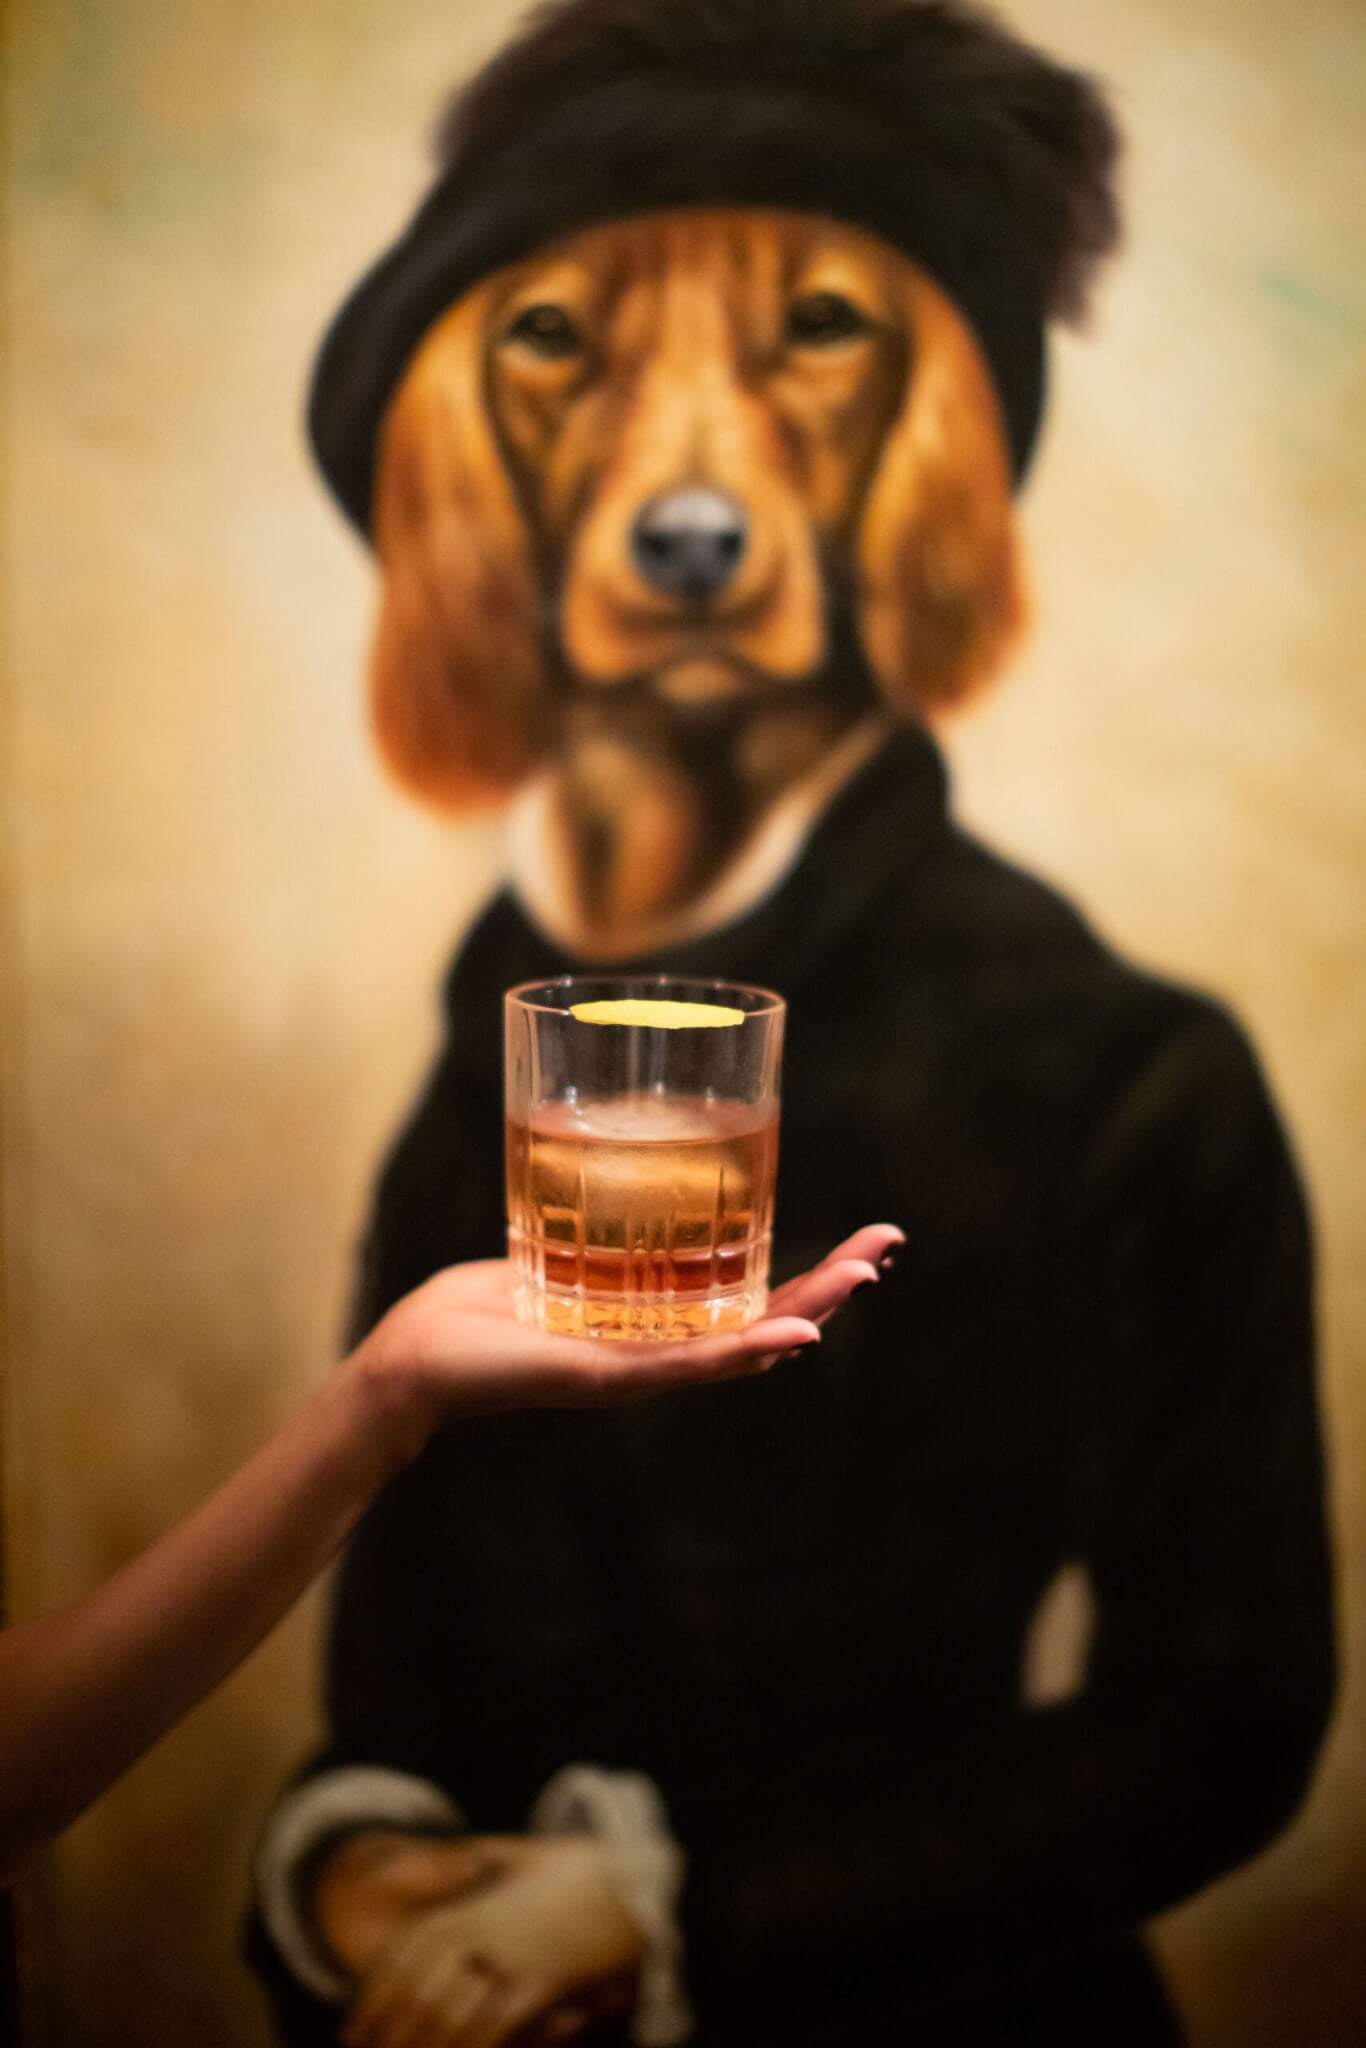 the rickey cocktail bar dog poster